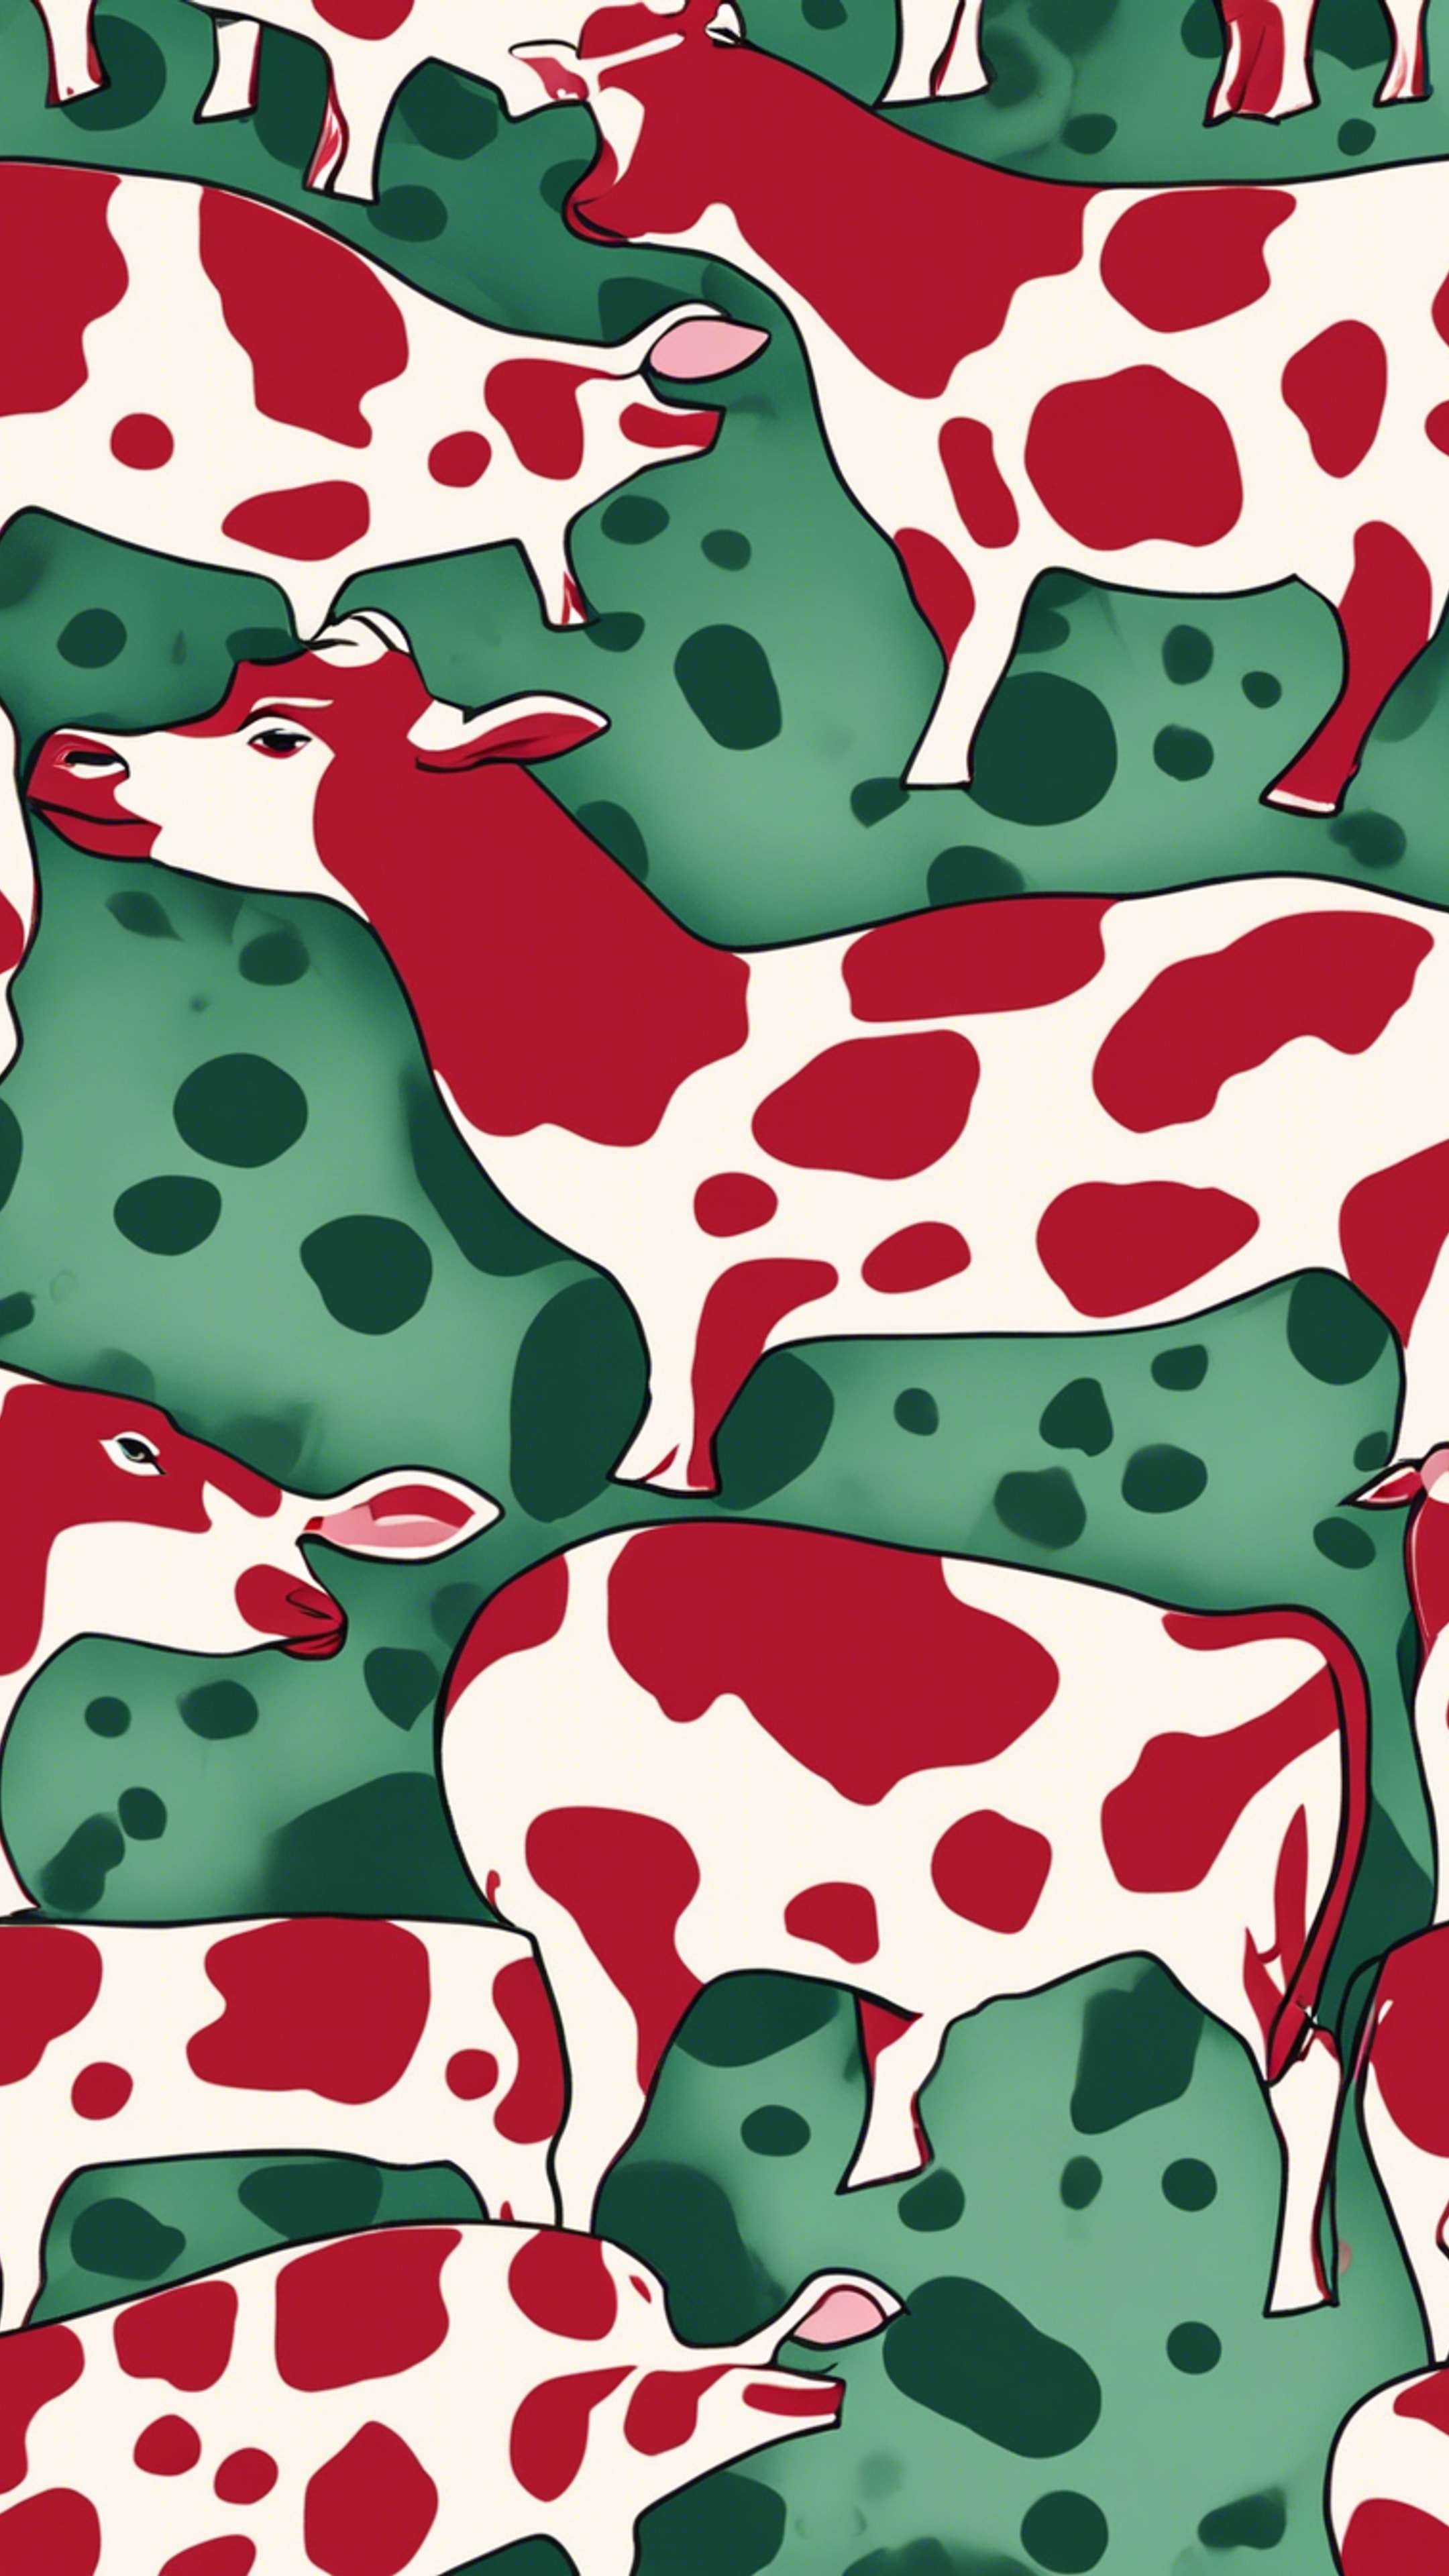 A dynamic, textured pattern of red and green cow spots. Wallpaper[159333102a774de6a0e2]